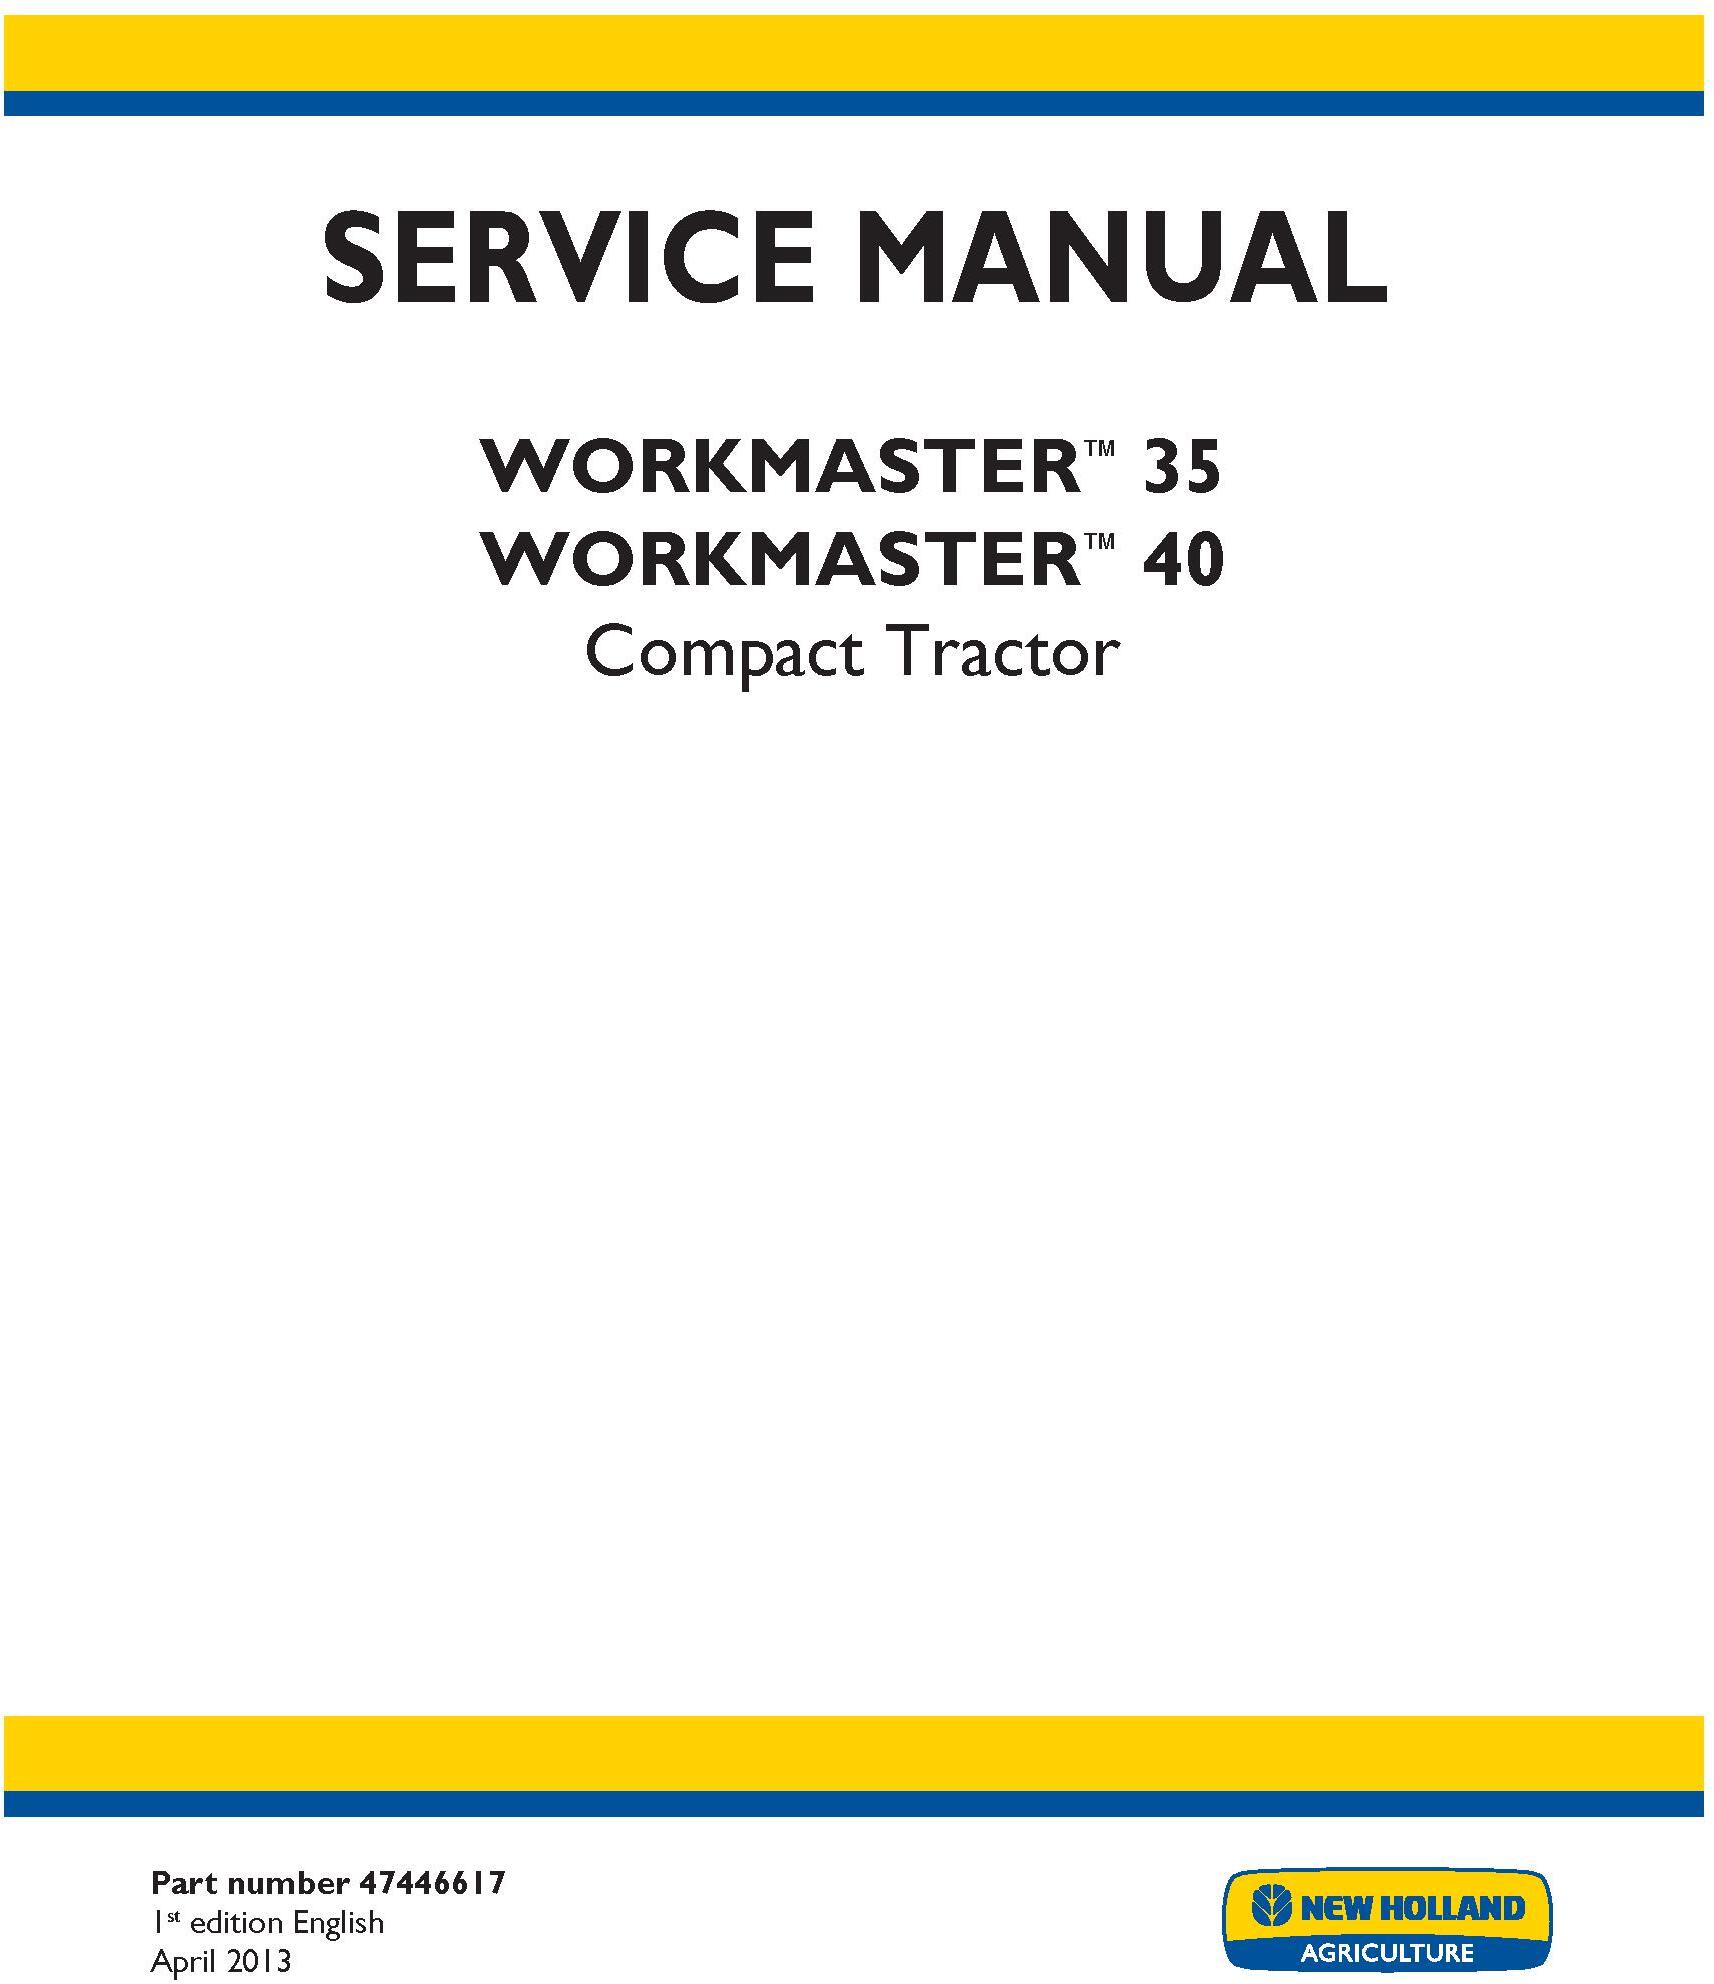 New Holland Workmaster 35, Workmaster 40 Compact Tractor Complete Service Manual - 19380